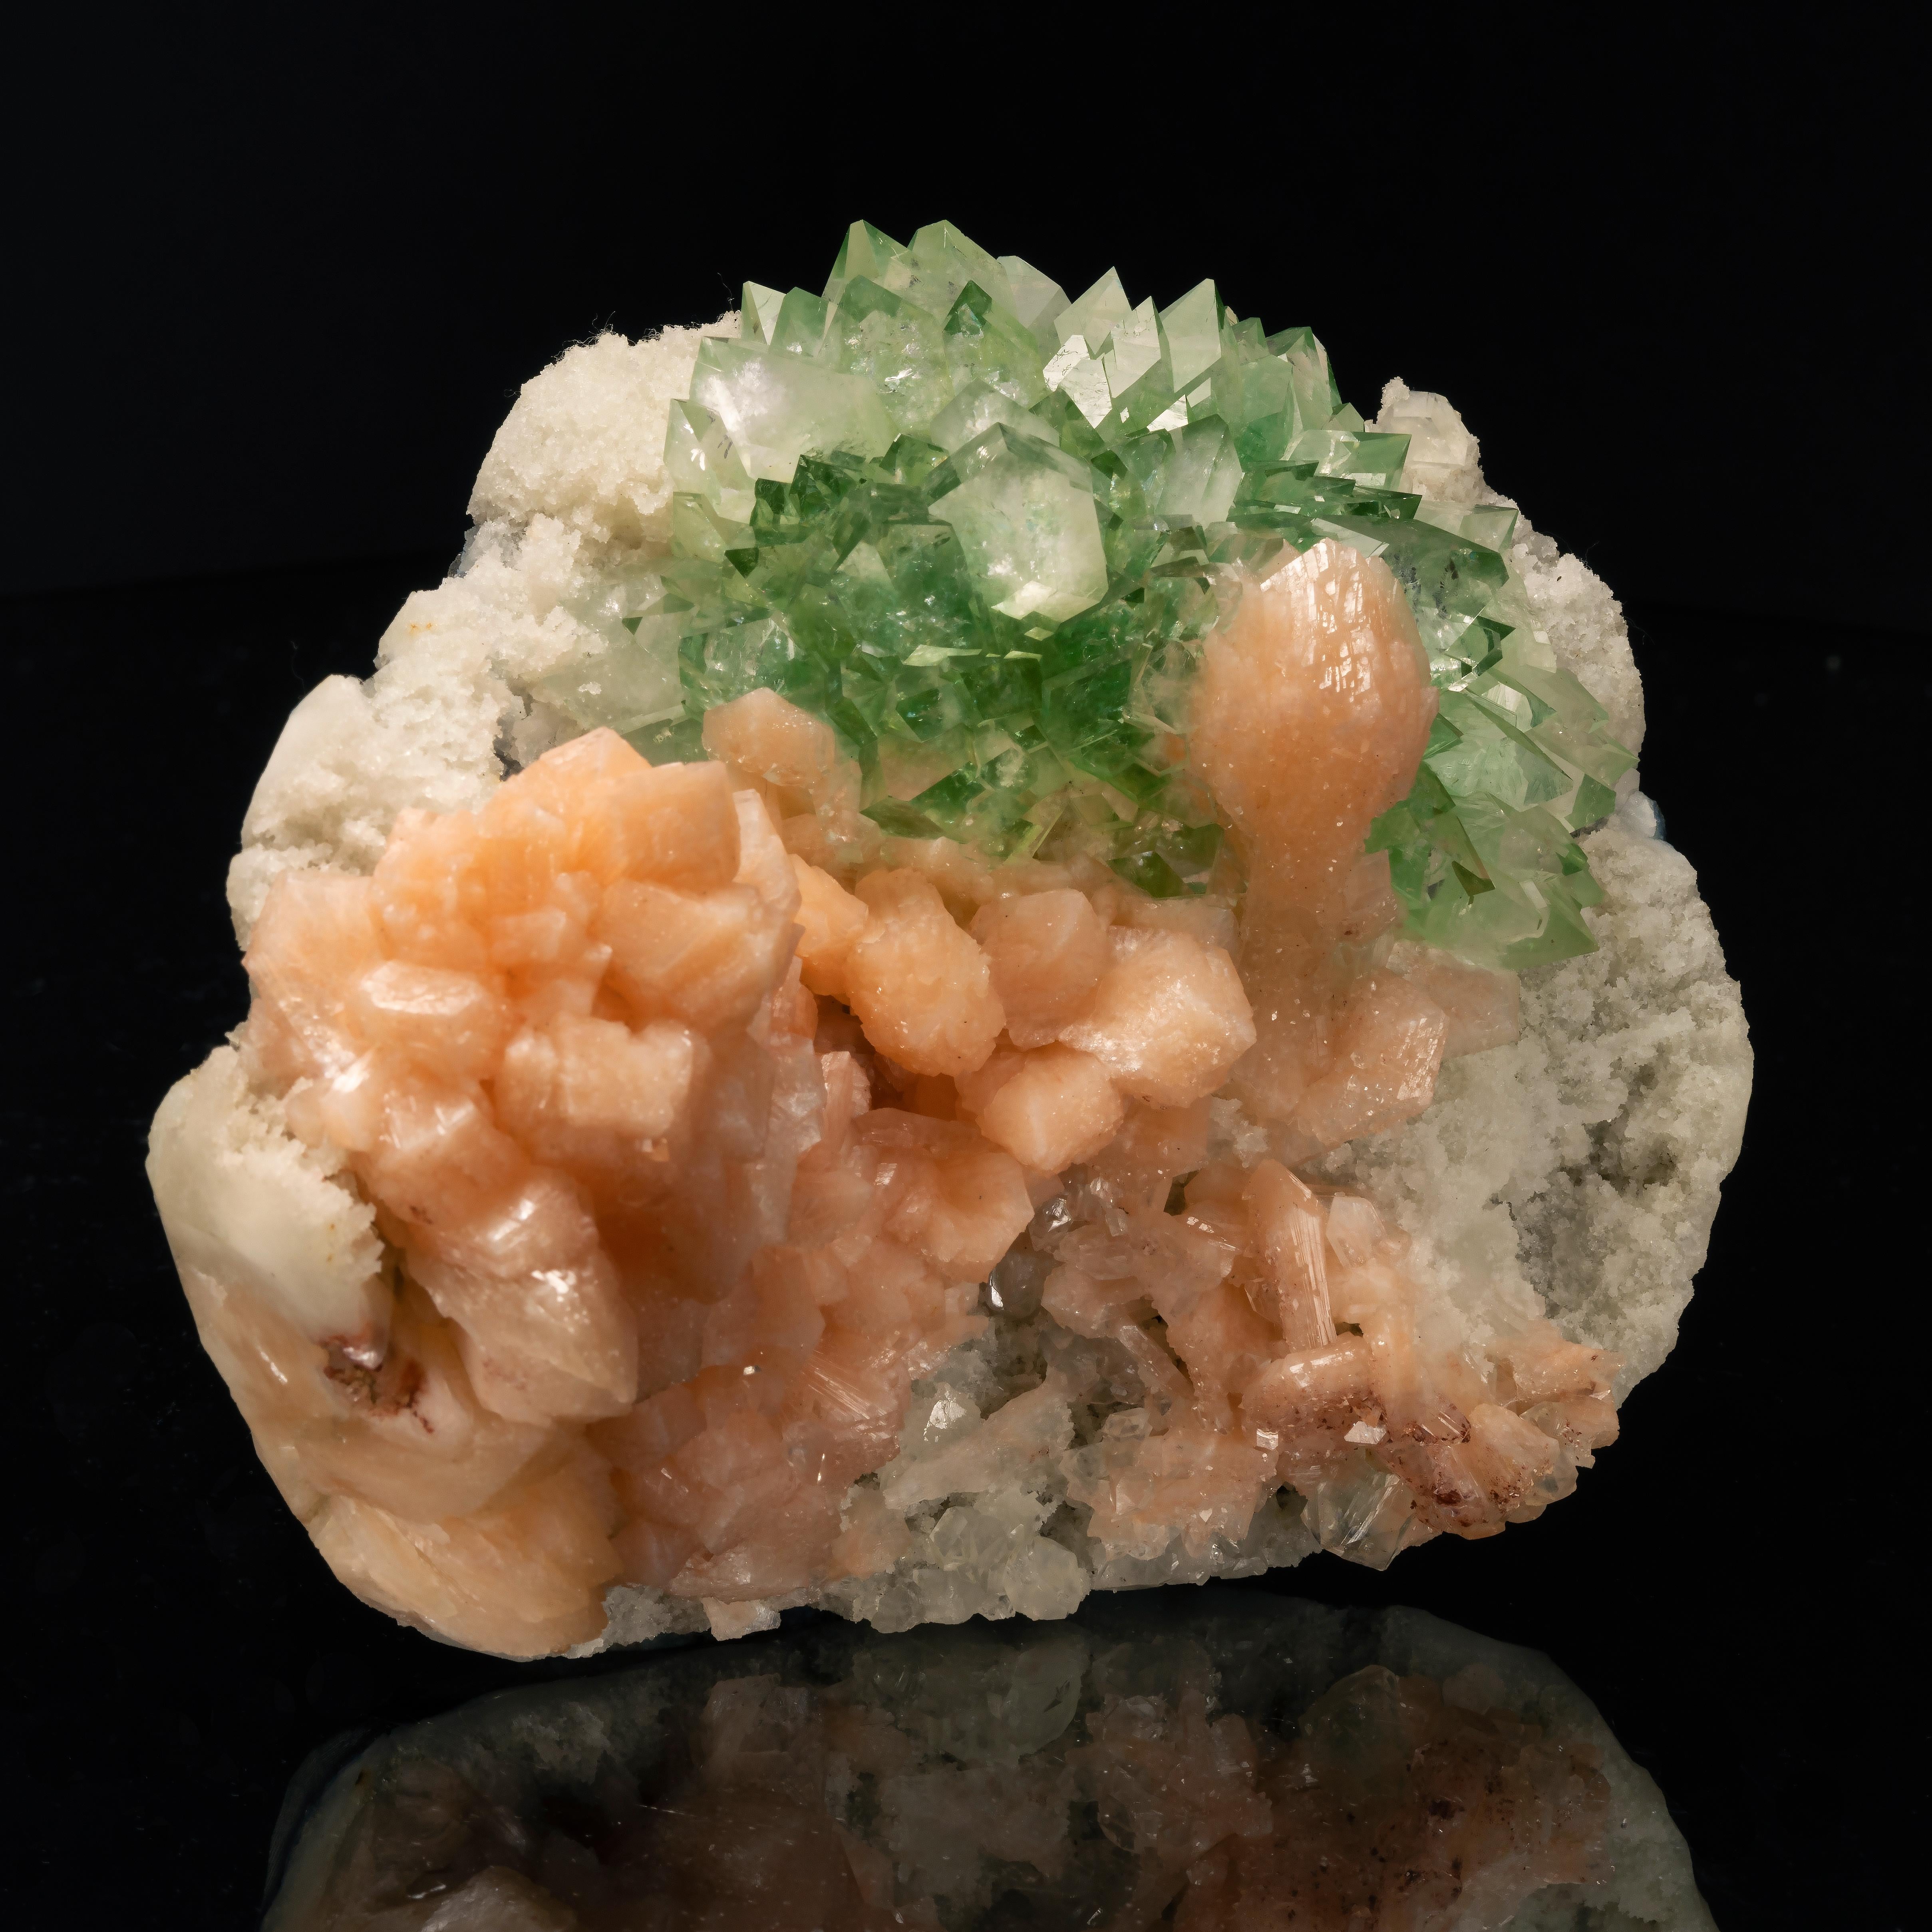 This show-stopping specimen displays a stunning, deep colored perfectly translucent green apophyllite crystals with flawlessly terminated tips, accented by a lushly peach-hued stilbite crystals that is balance the left-hand side of the matrix and